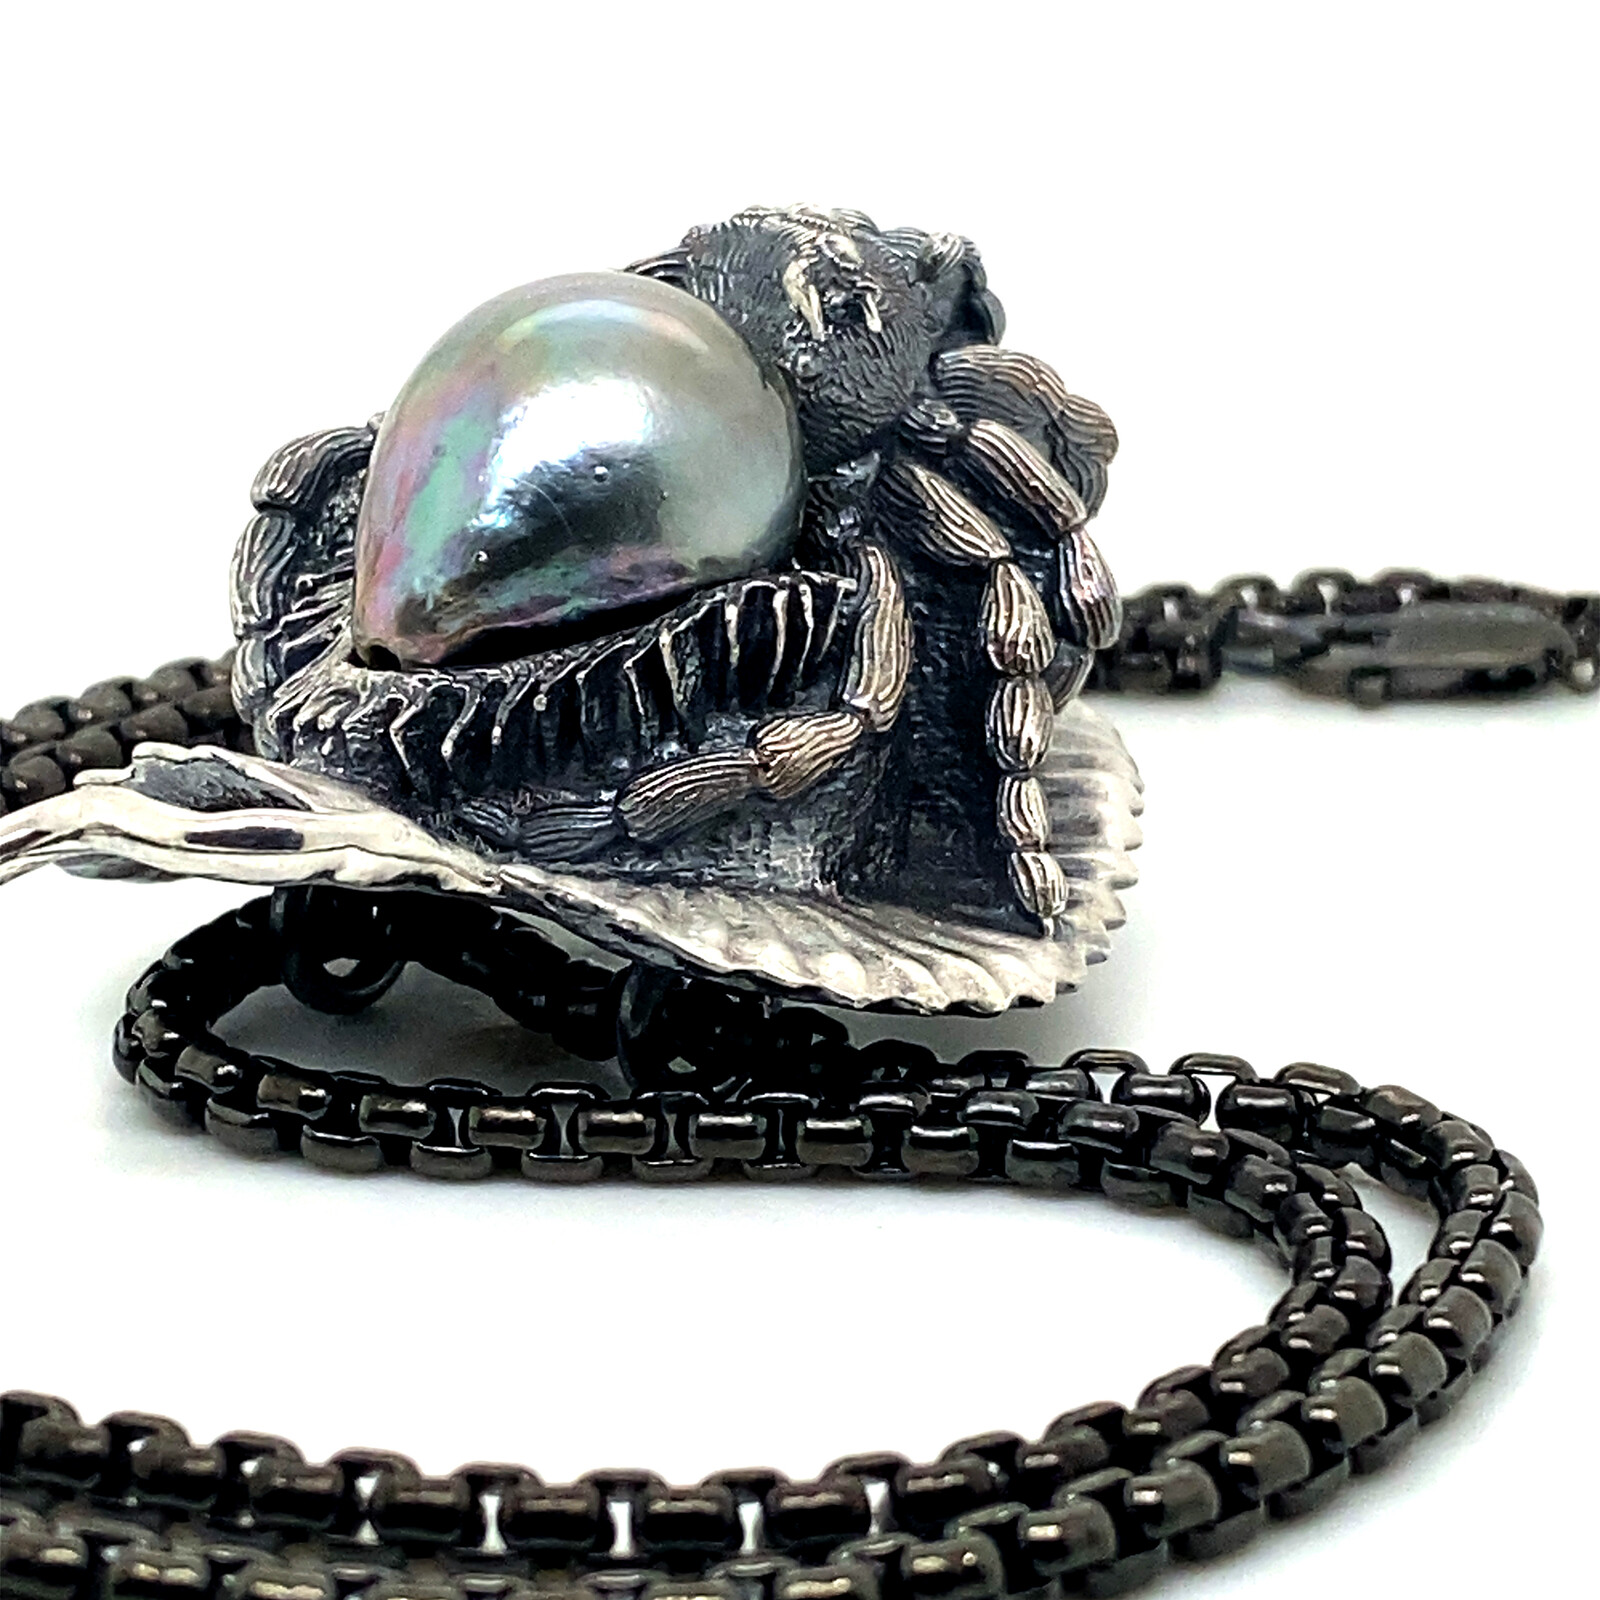 Photo of the pendant cast in sterling silver with a Tahitian pearl for the abdomen.